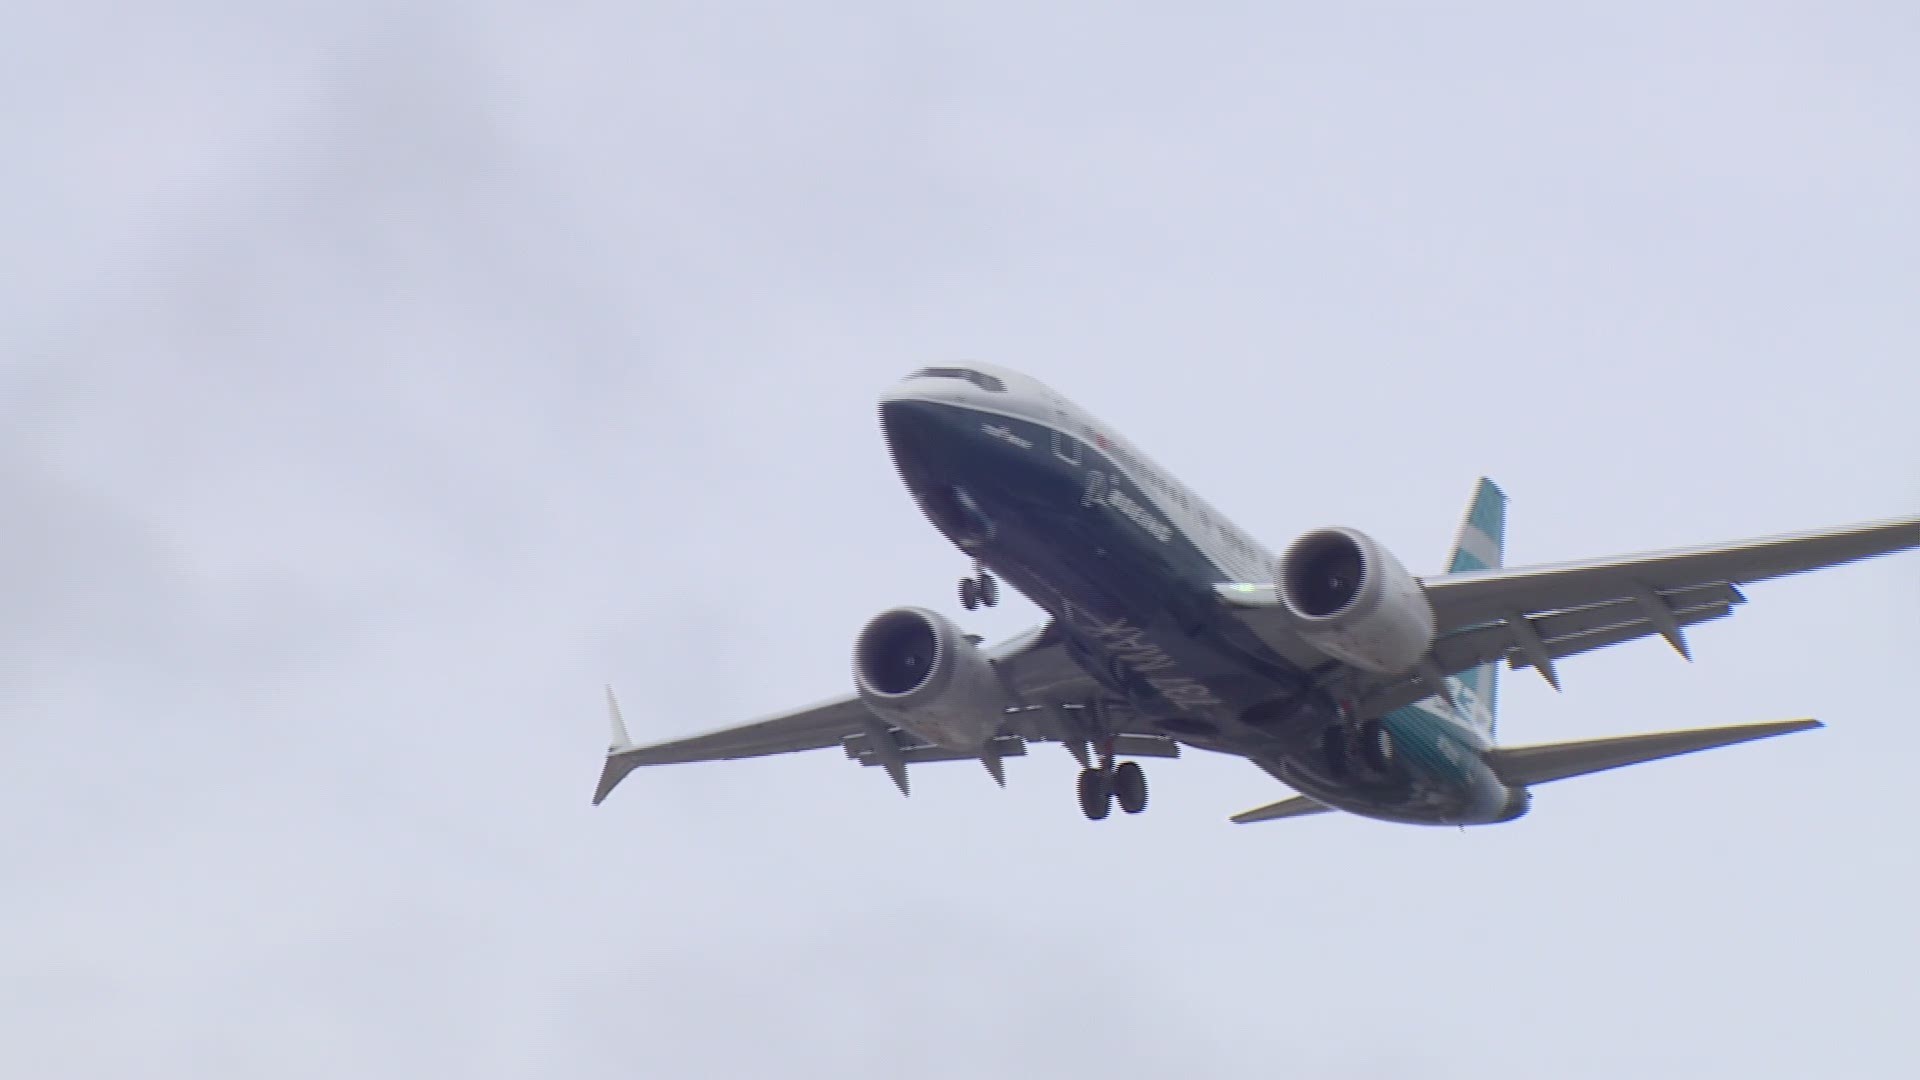 Boeing CEO Dennis Muilenberg took a test flight on a 737 MAX plane over Seattle and released a video statement Wednesday.